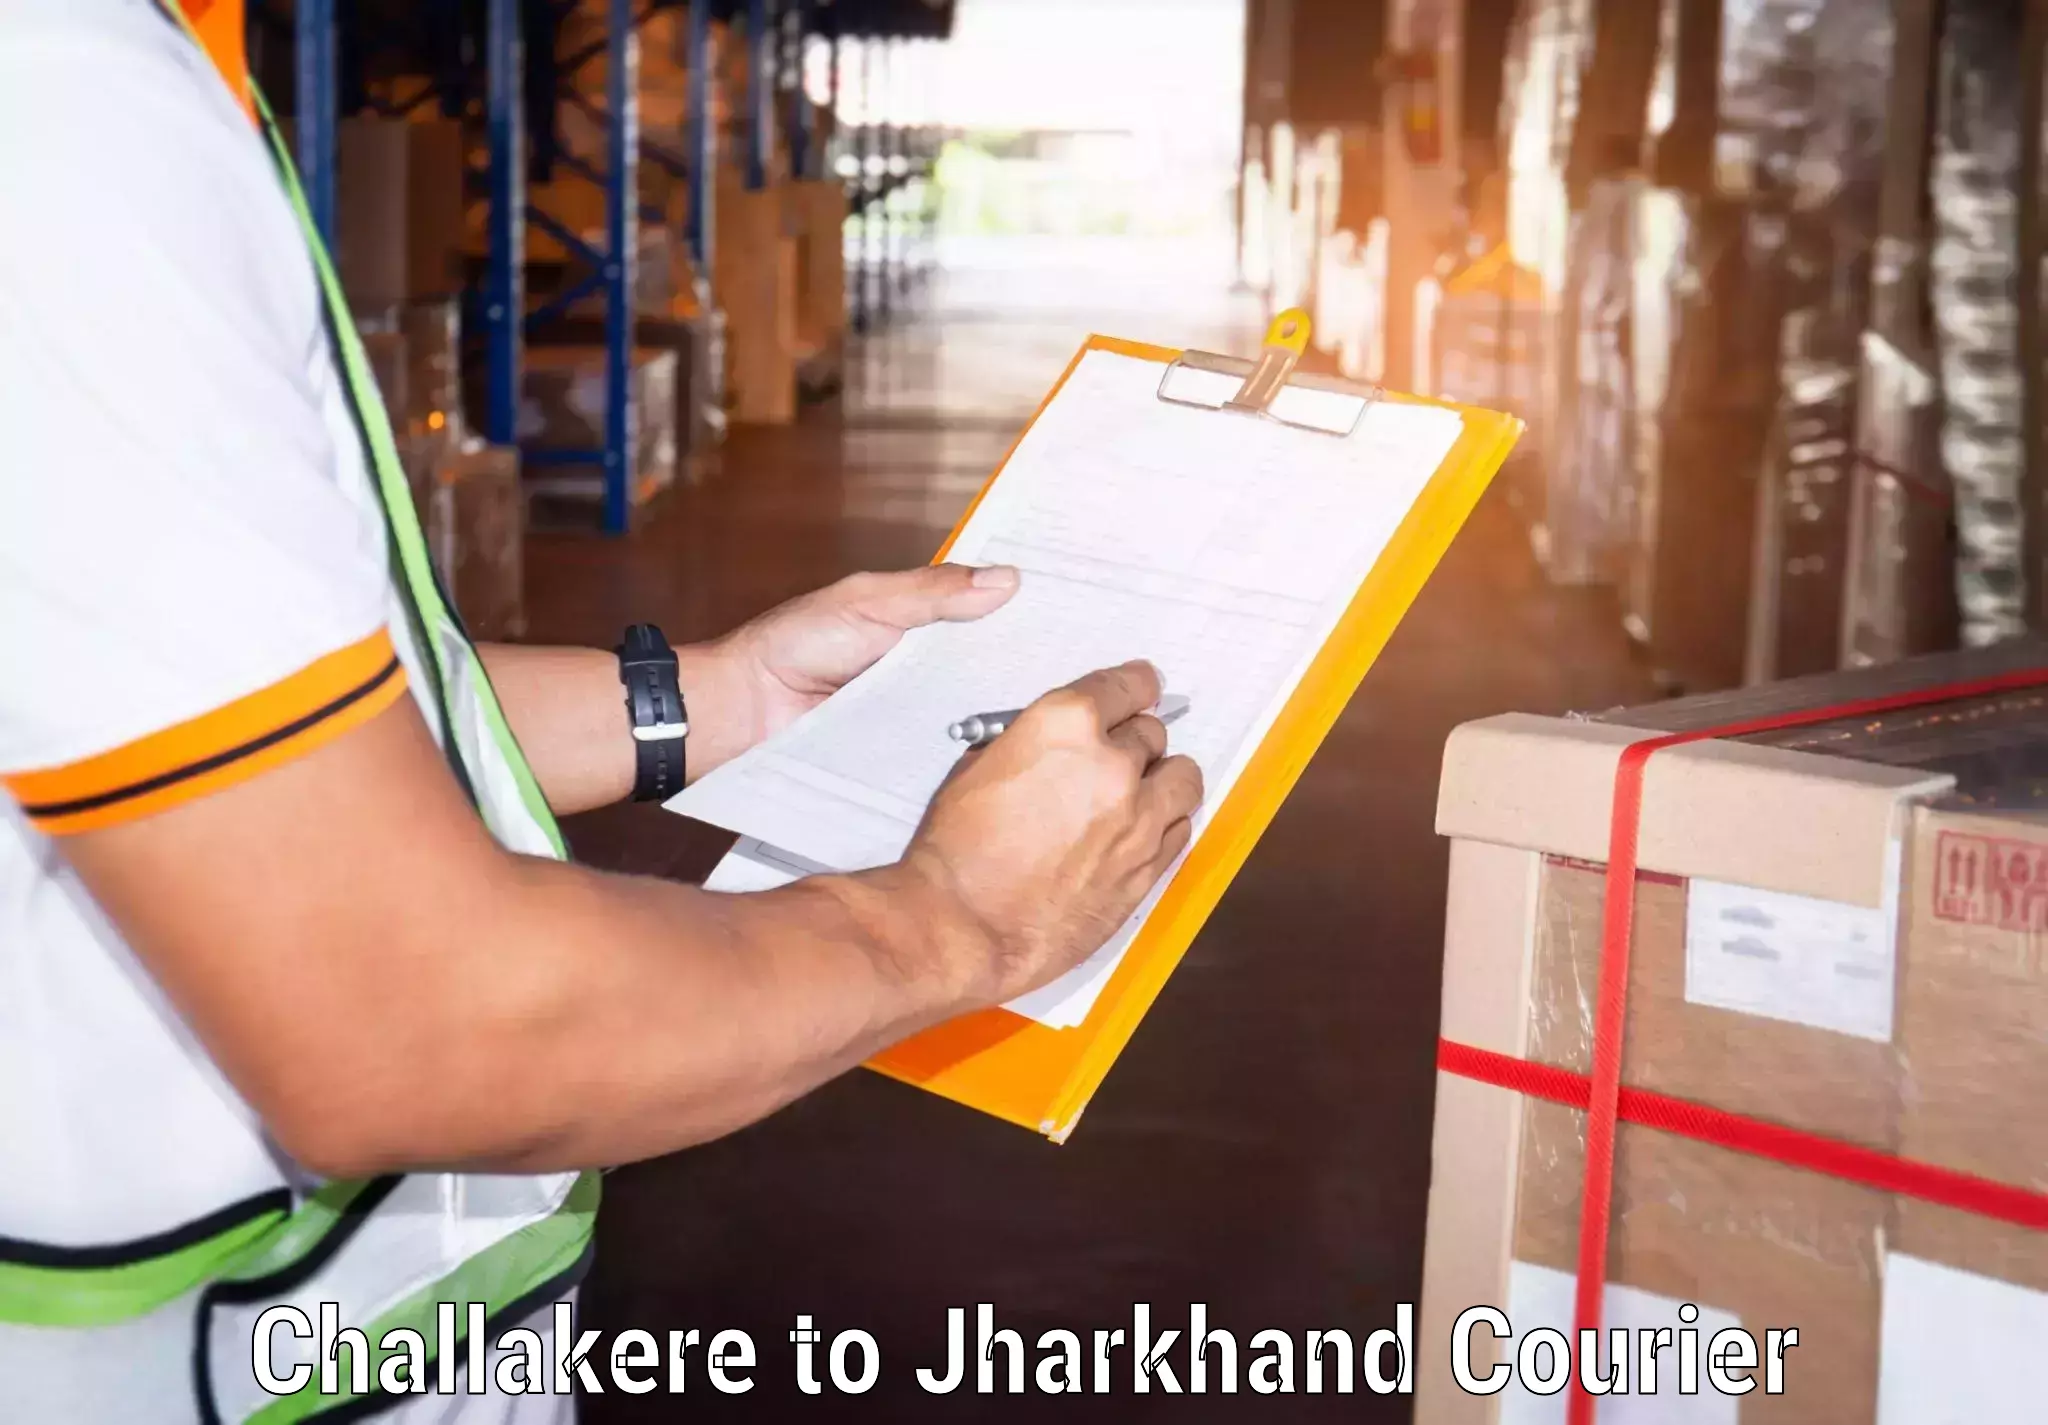 Courier service comparison Challakere to IIT Dhanbad